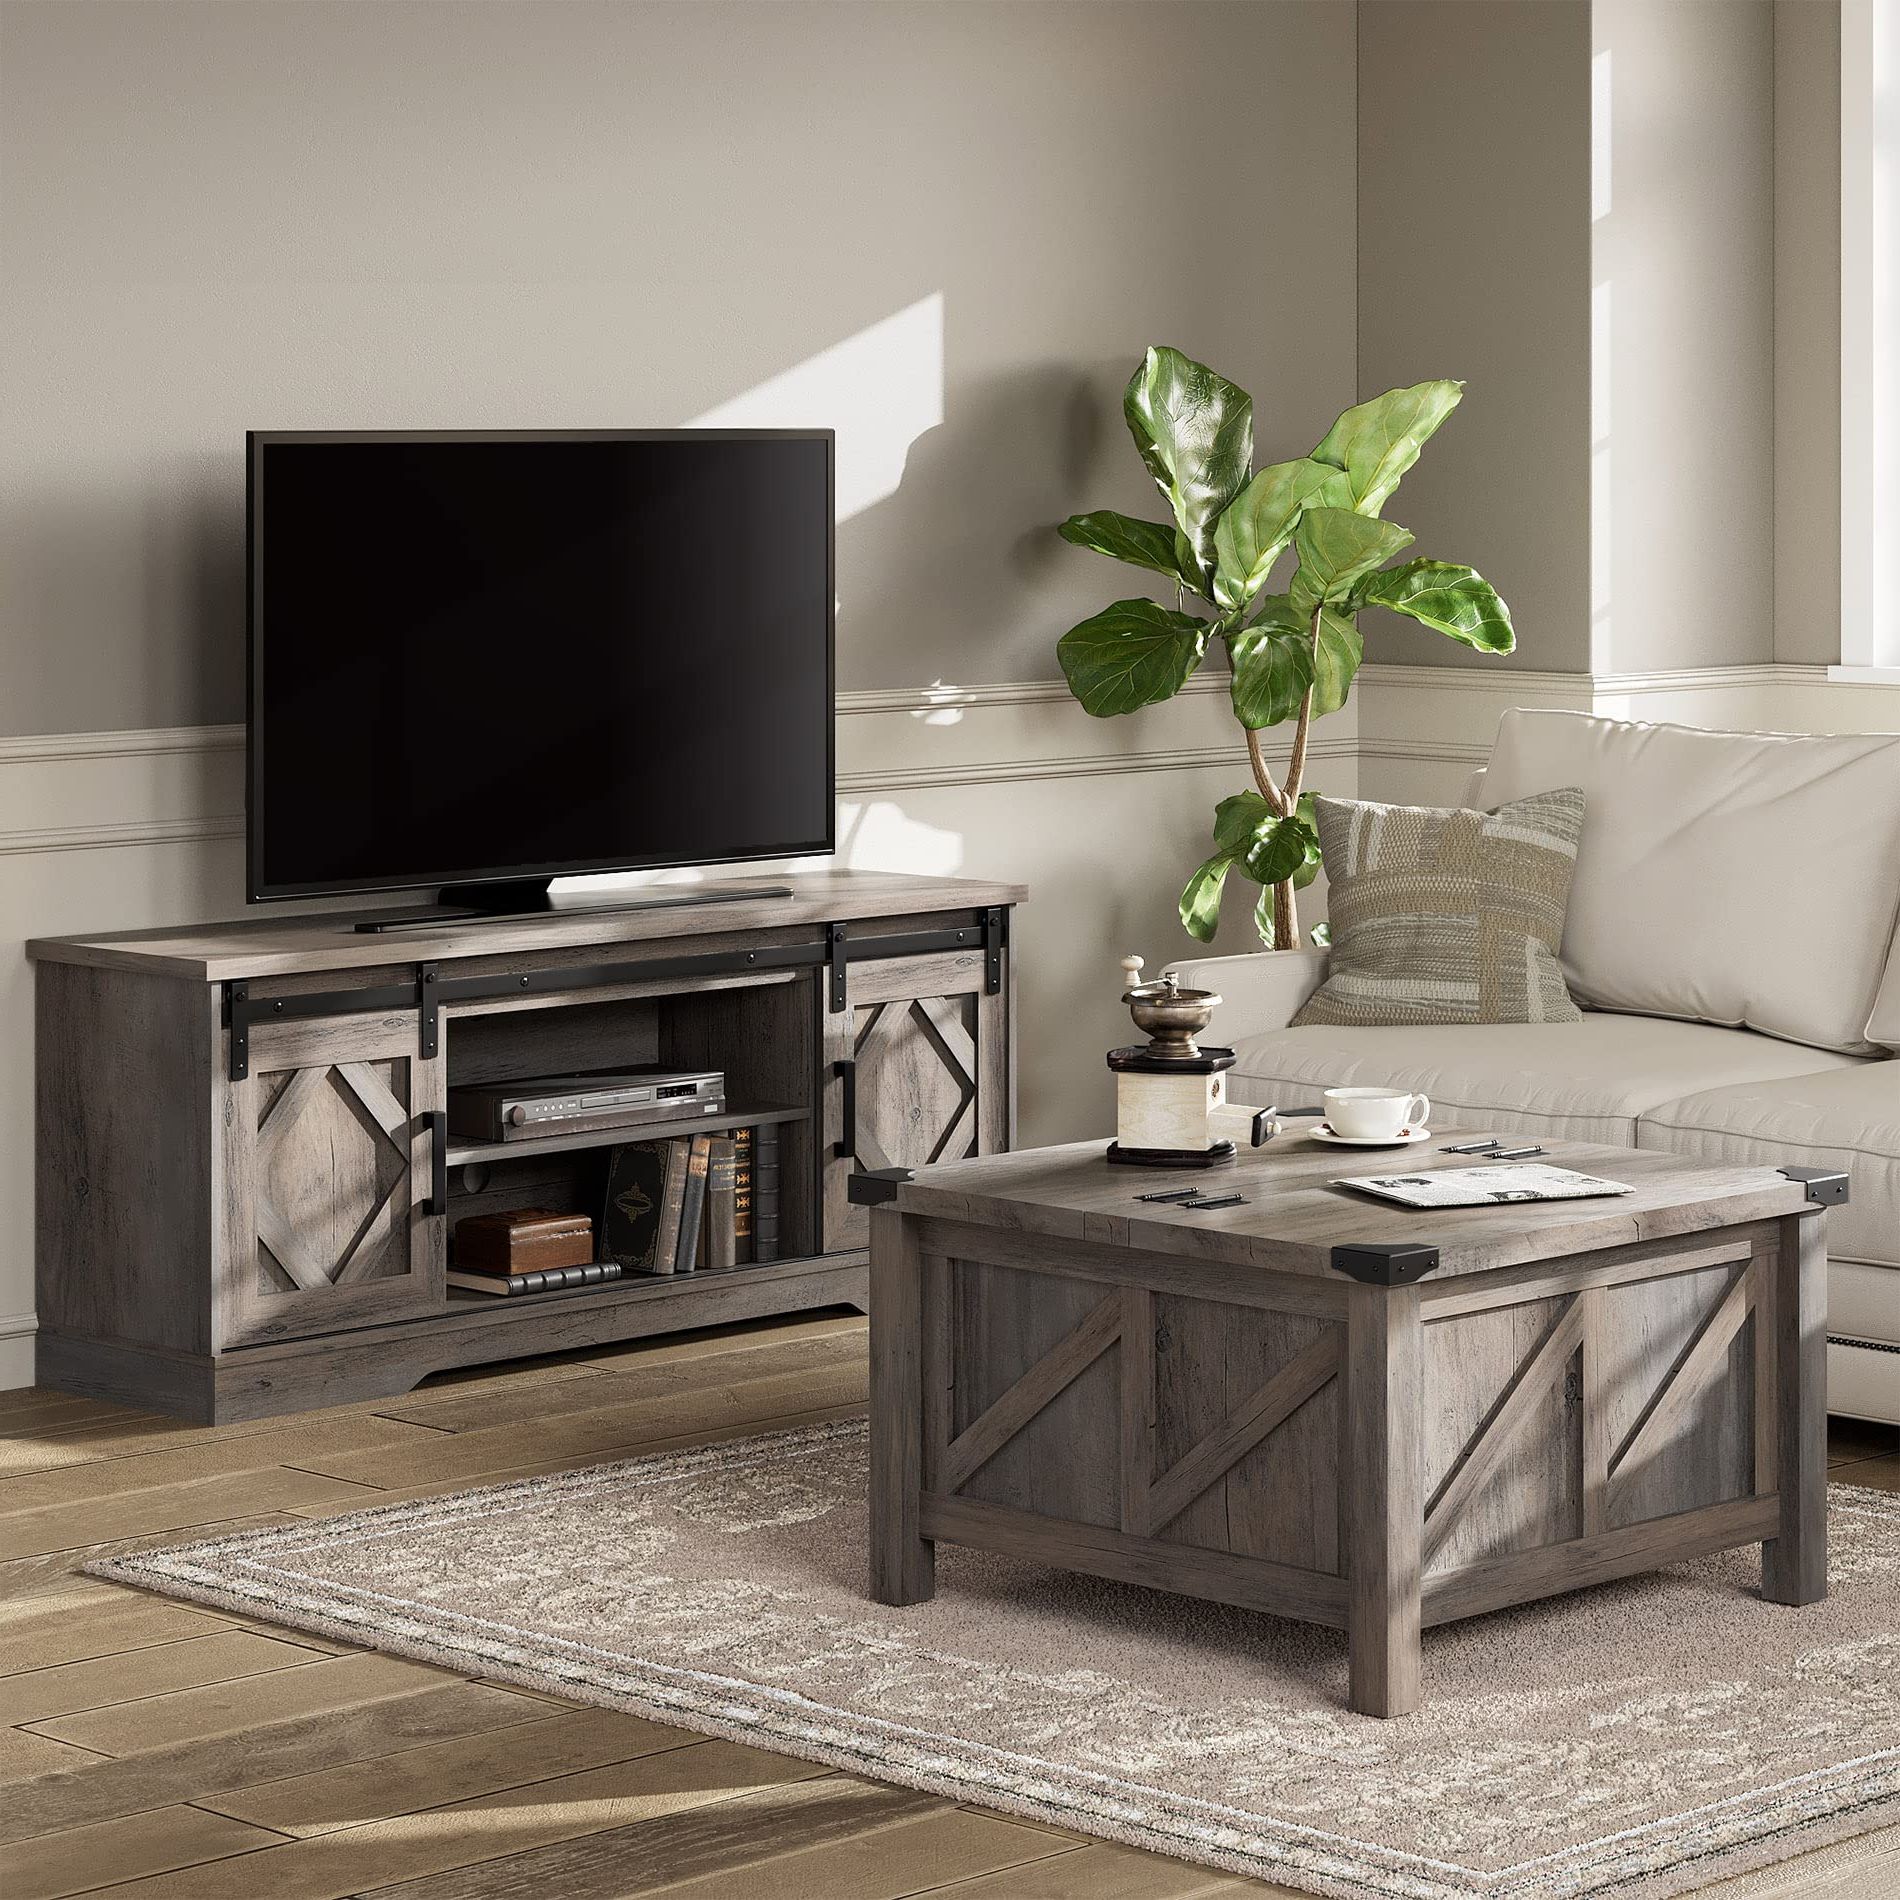 Recent Lift Top Tv Stands Regarding Amazon: Wampat Farmhouse Sliding Barn Door Tv Stand And Coffee Table  Set Of 2,modern Storage Entertainment Center For Tvs Up To 65'', Square  Wood Center Table With Gas Struts Lift Top For Living (View 1 of 10)